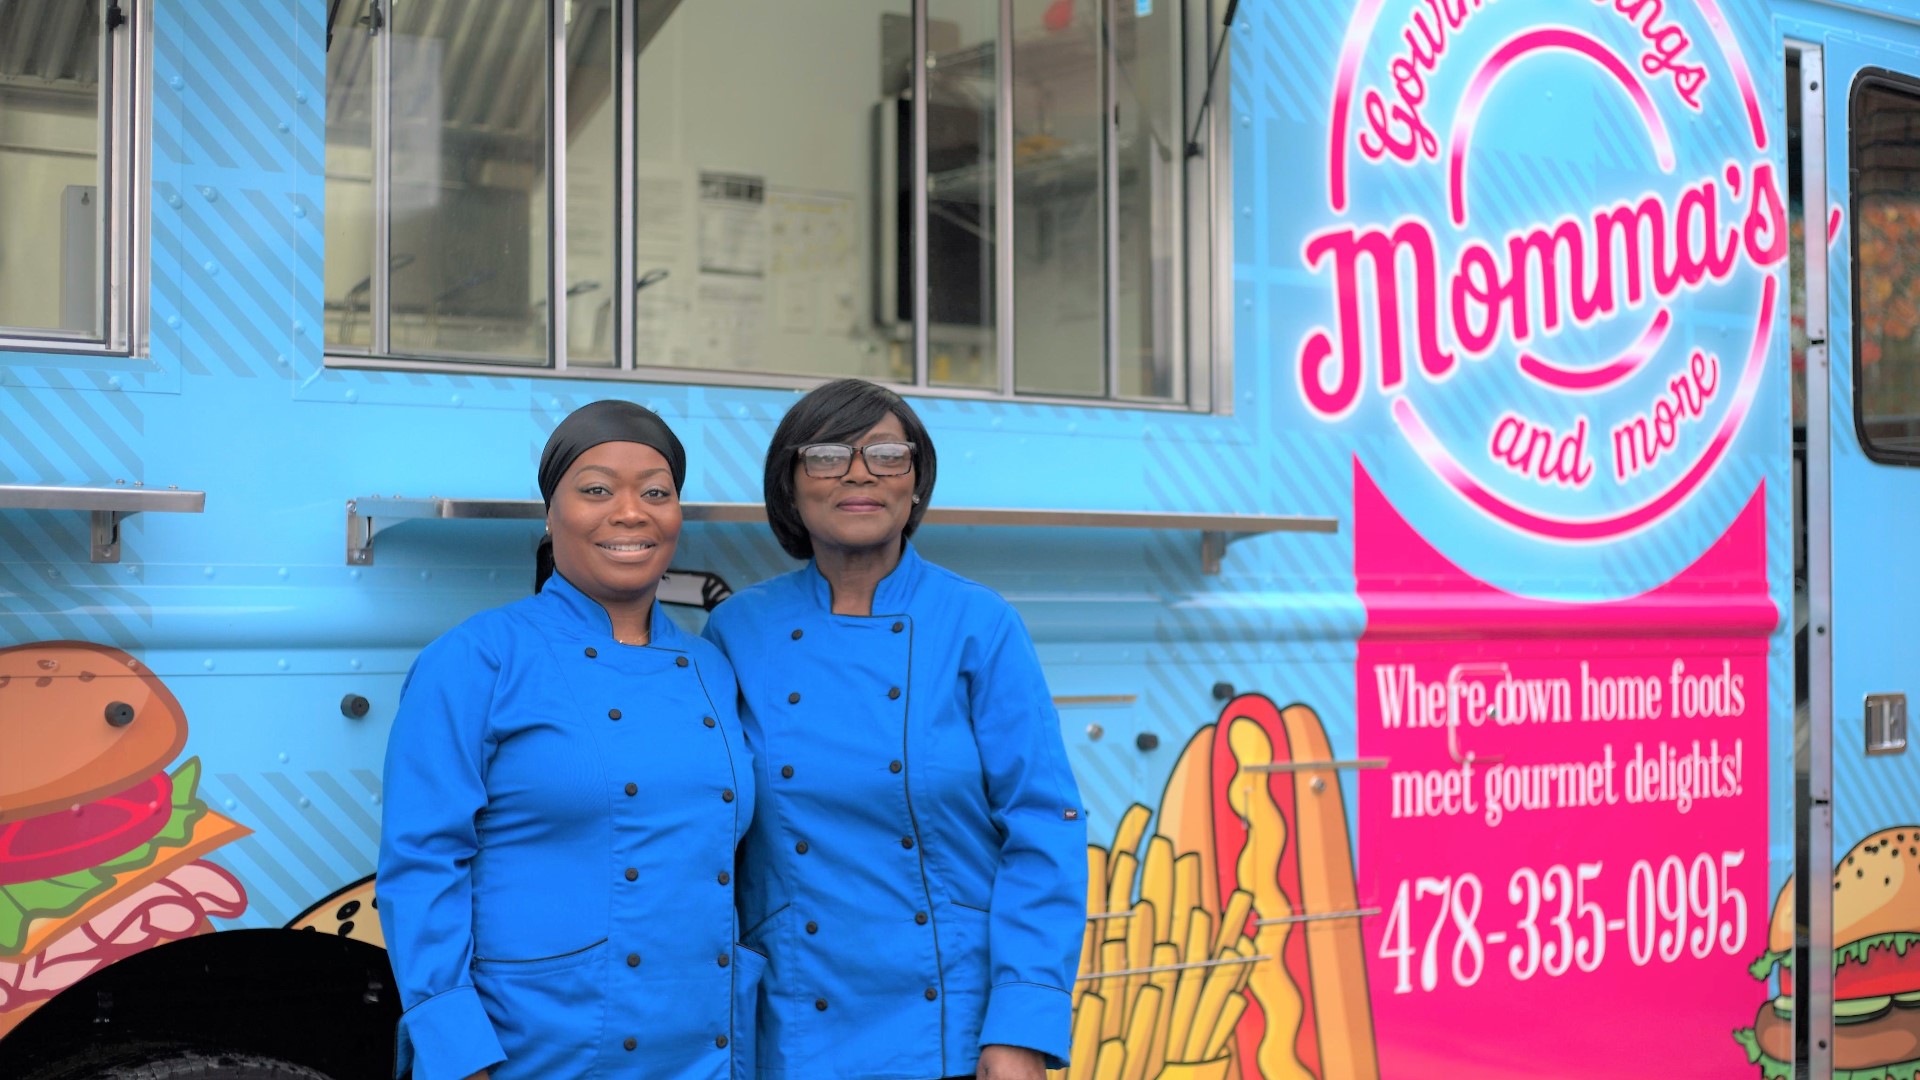 After working with the community to improve healthy eating habits, Lula Williams and Lorietta Brown decided to switch gears and open Momma's Gourmet Wings and More.